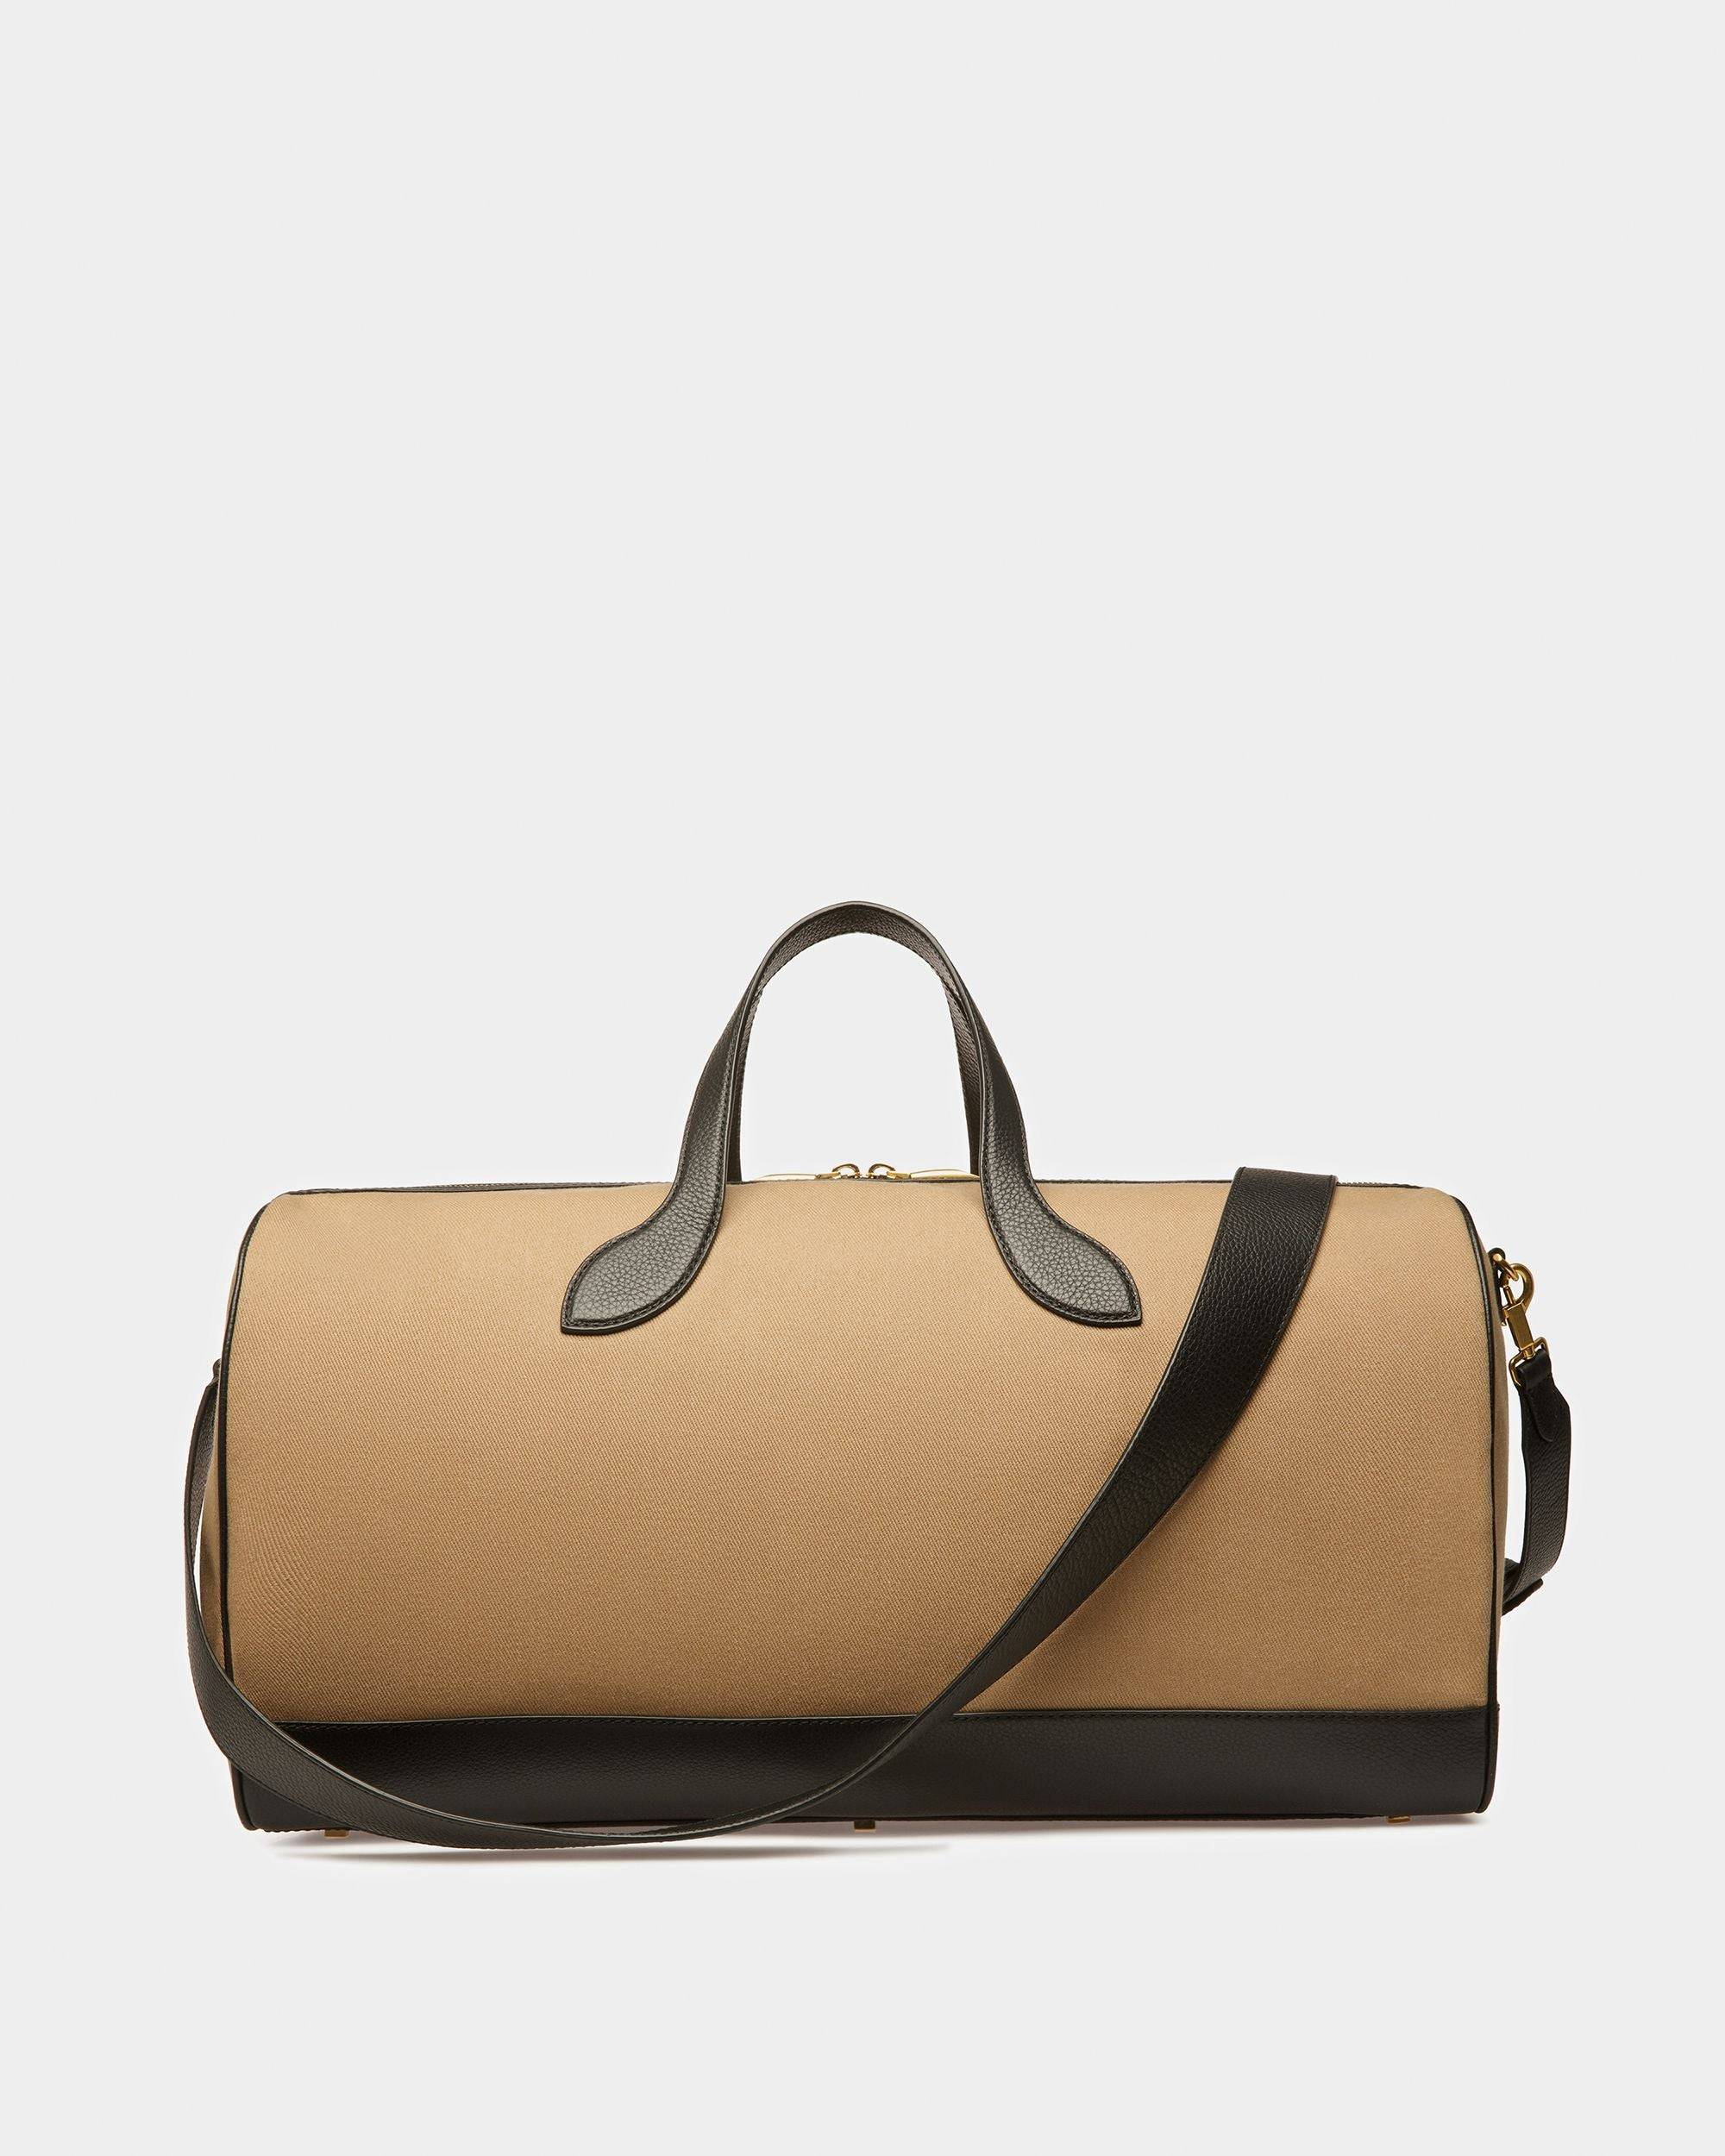 36 Hours | Men's Travel Bag | Sand And Black Fabric And Leather | Bally | Still Life Back